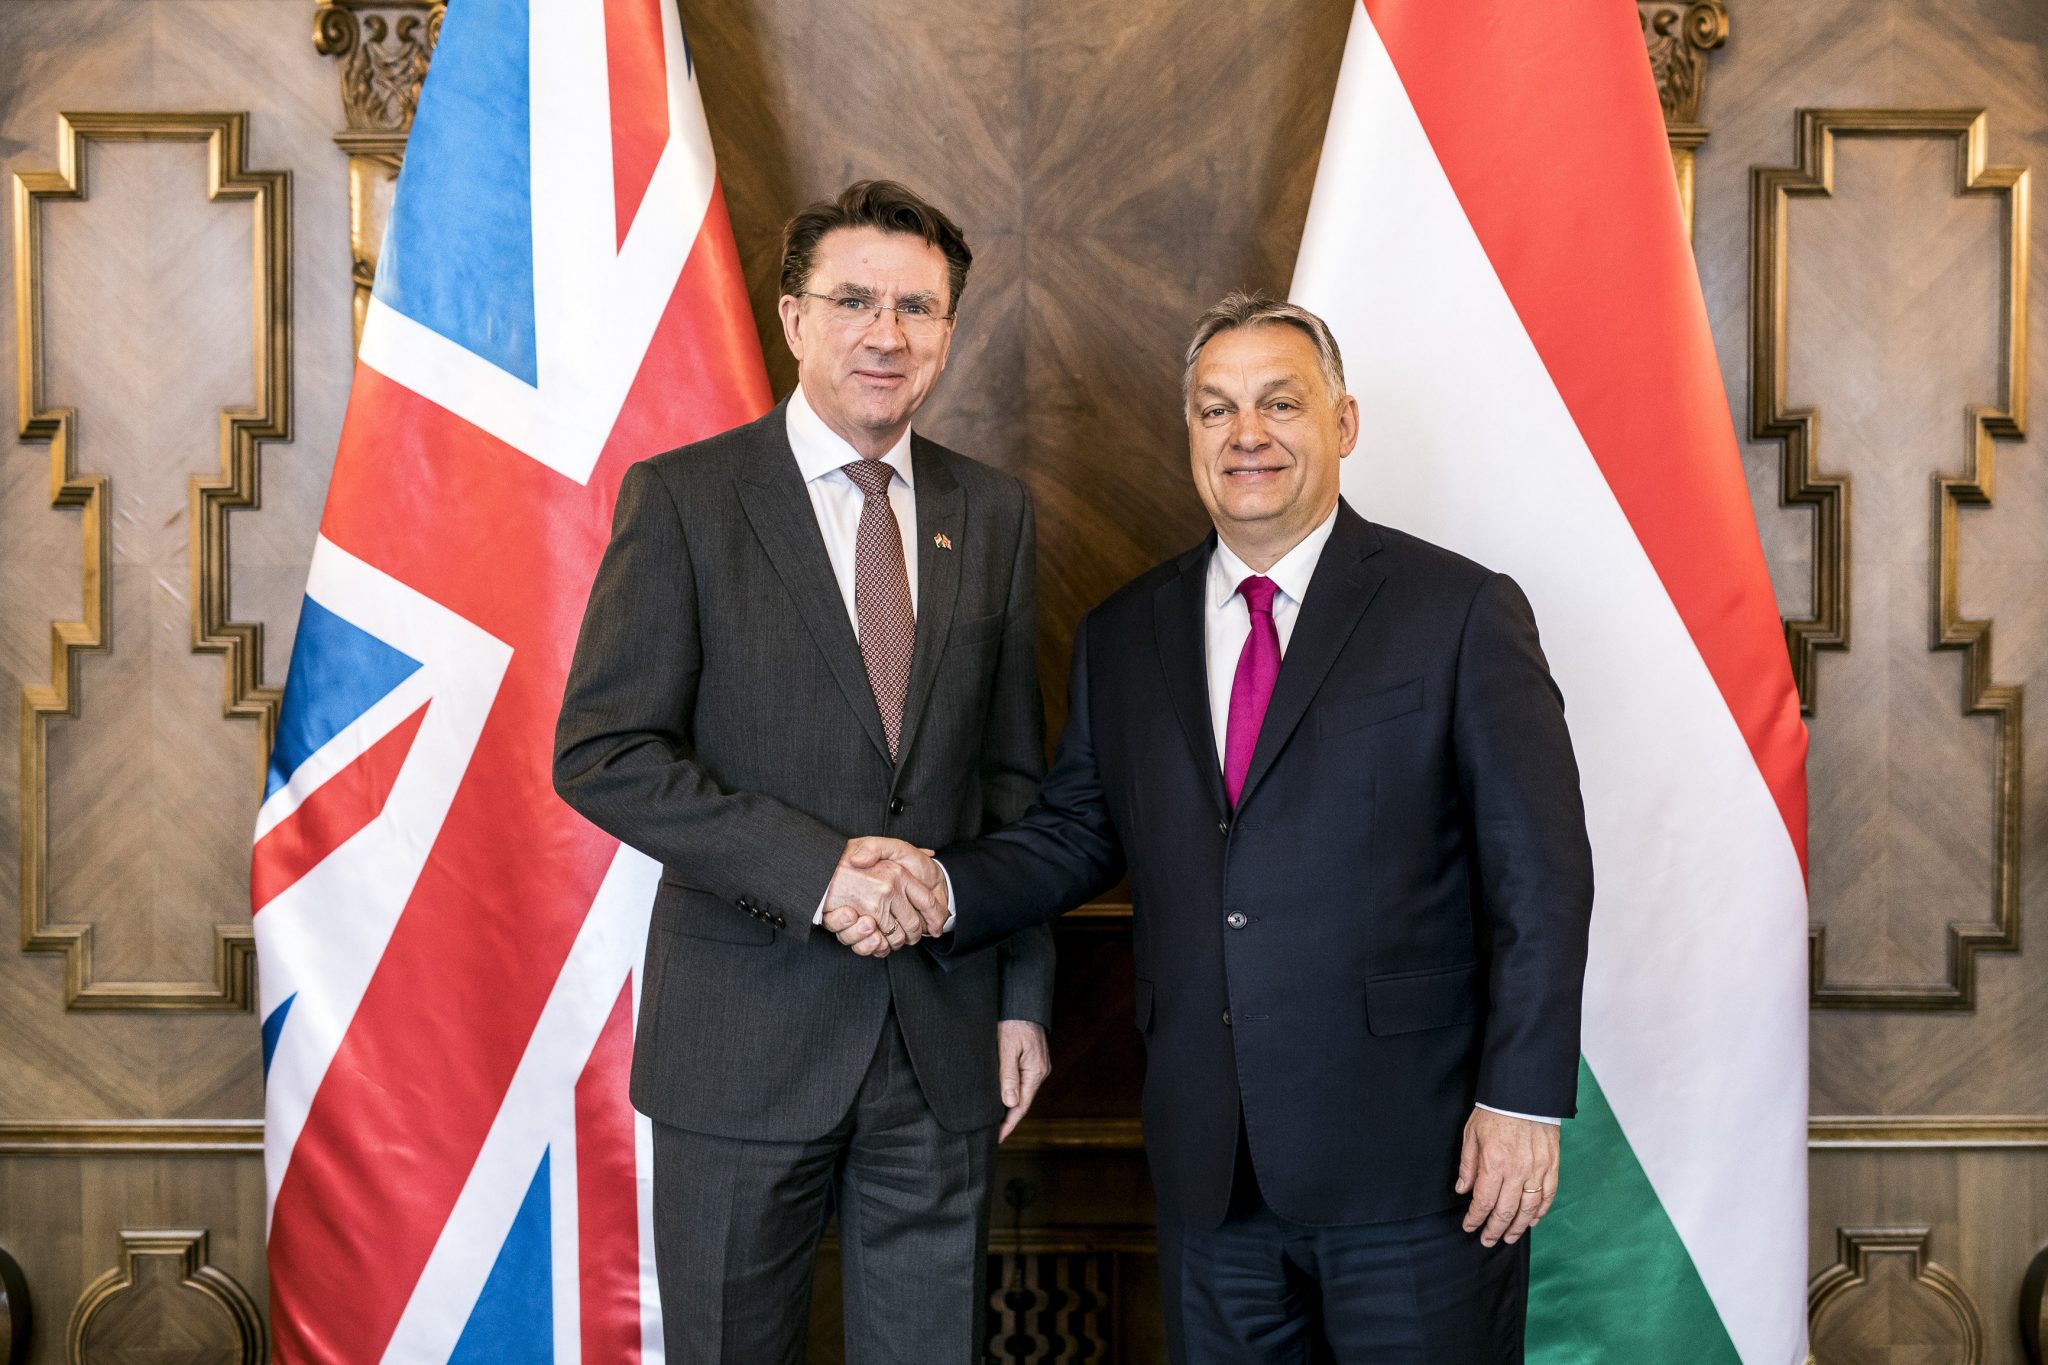 Britain and Hungary Share the Same Vision of Europe